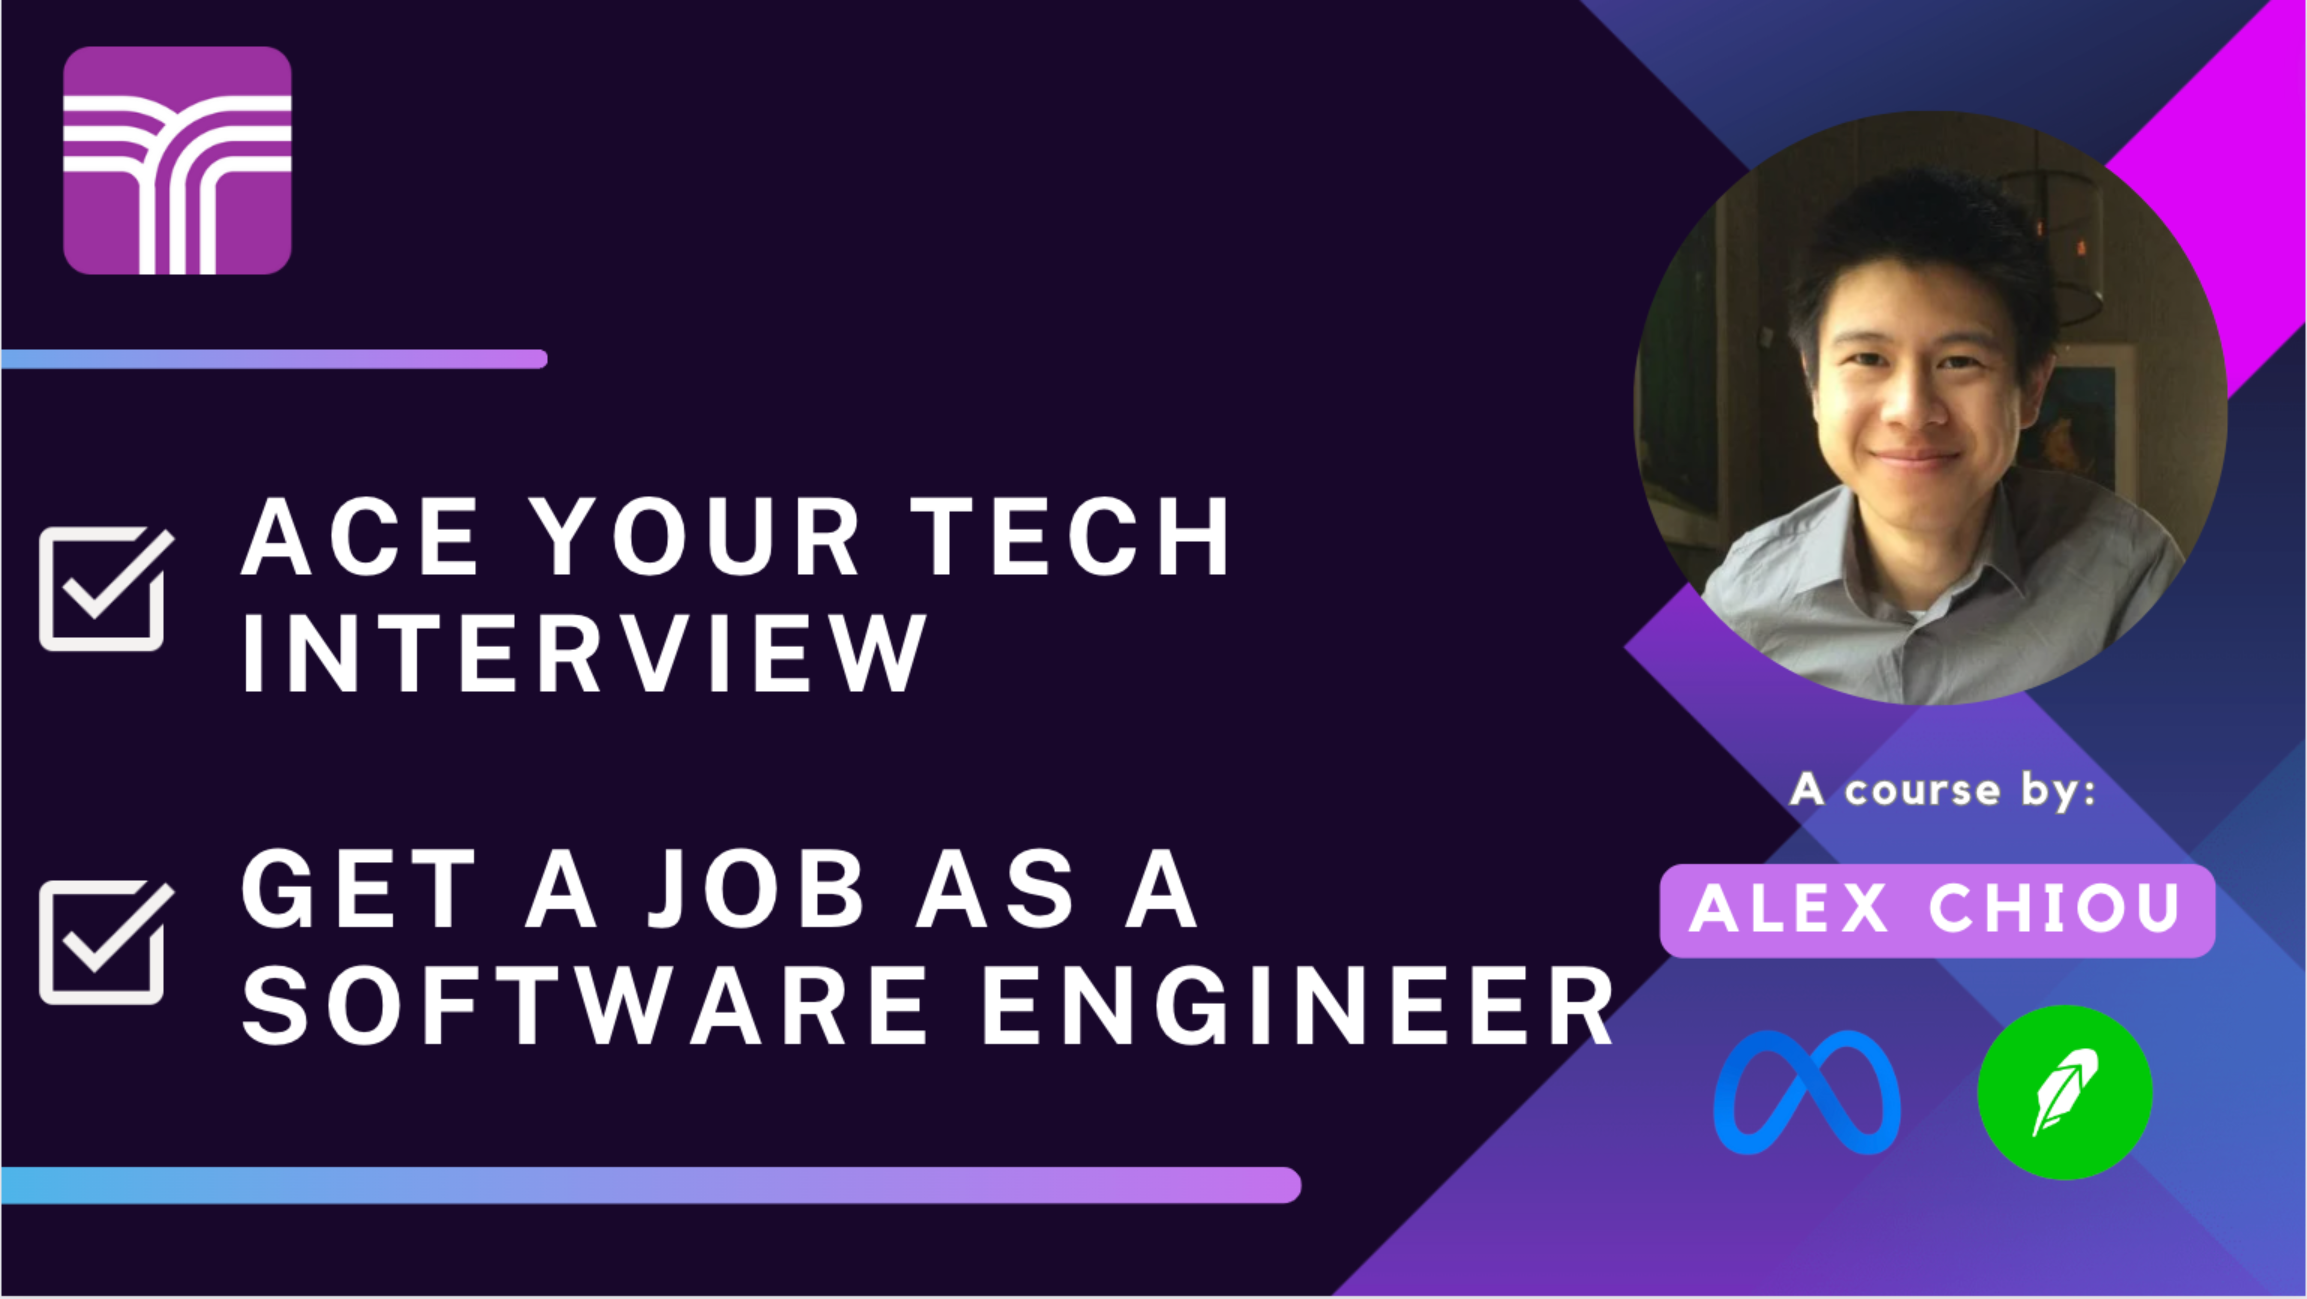 Ace Your Tech Interview And Get A Job As A Software Engineer poster